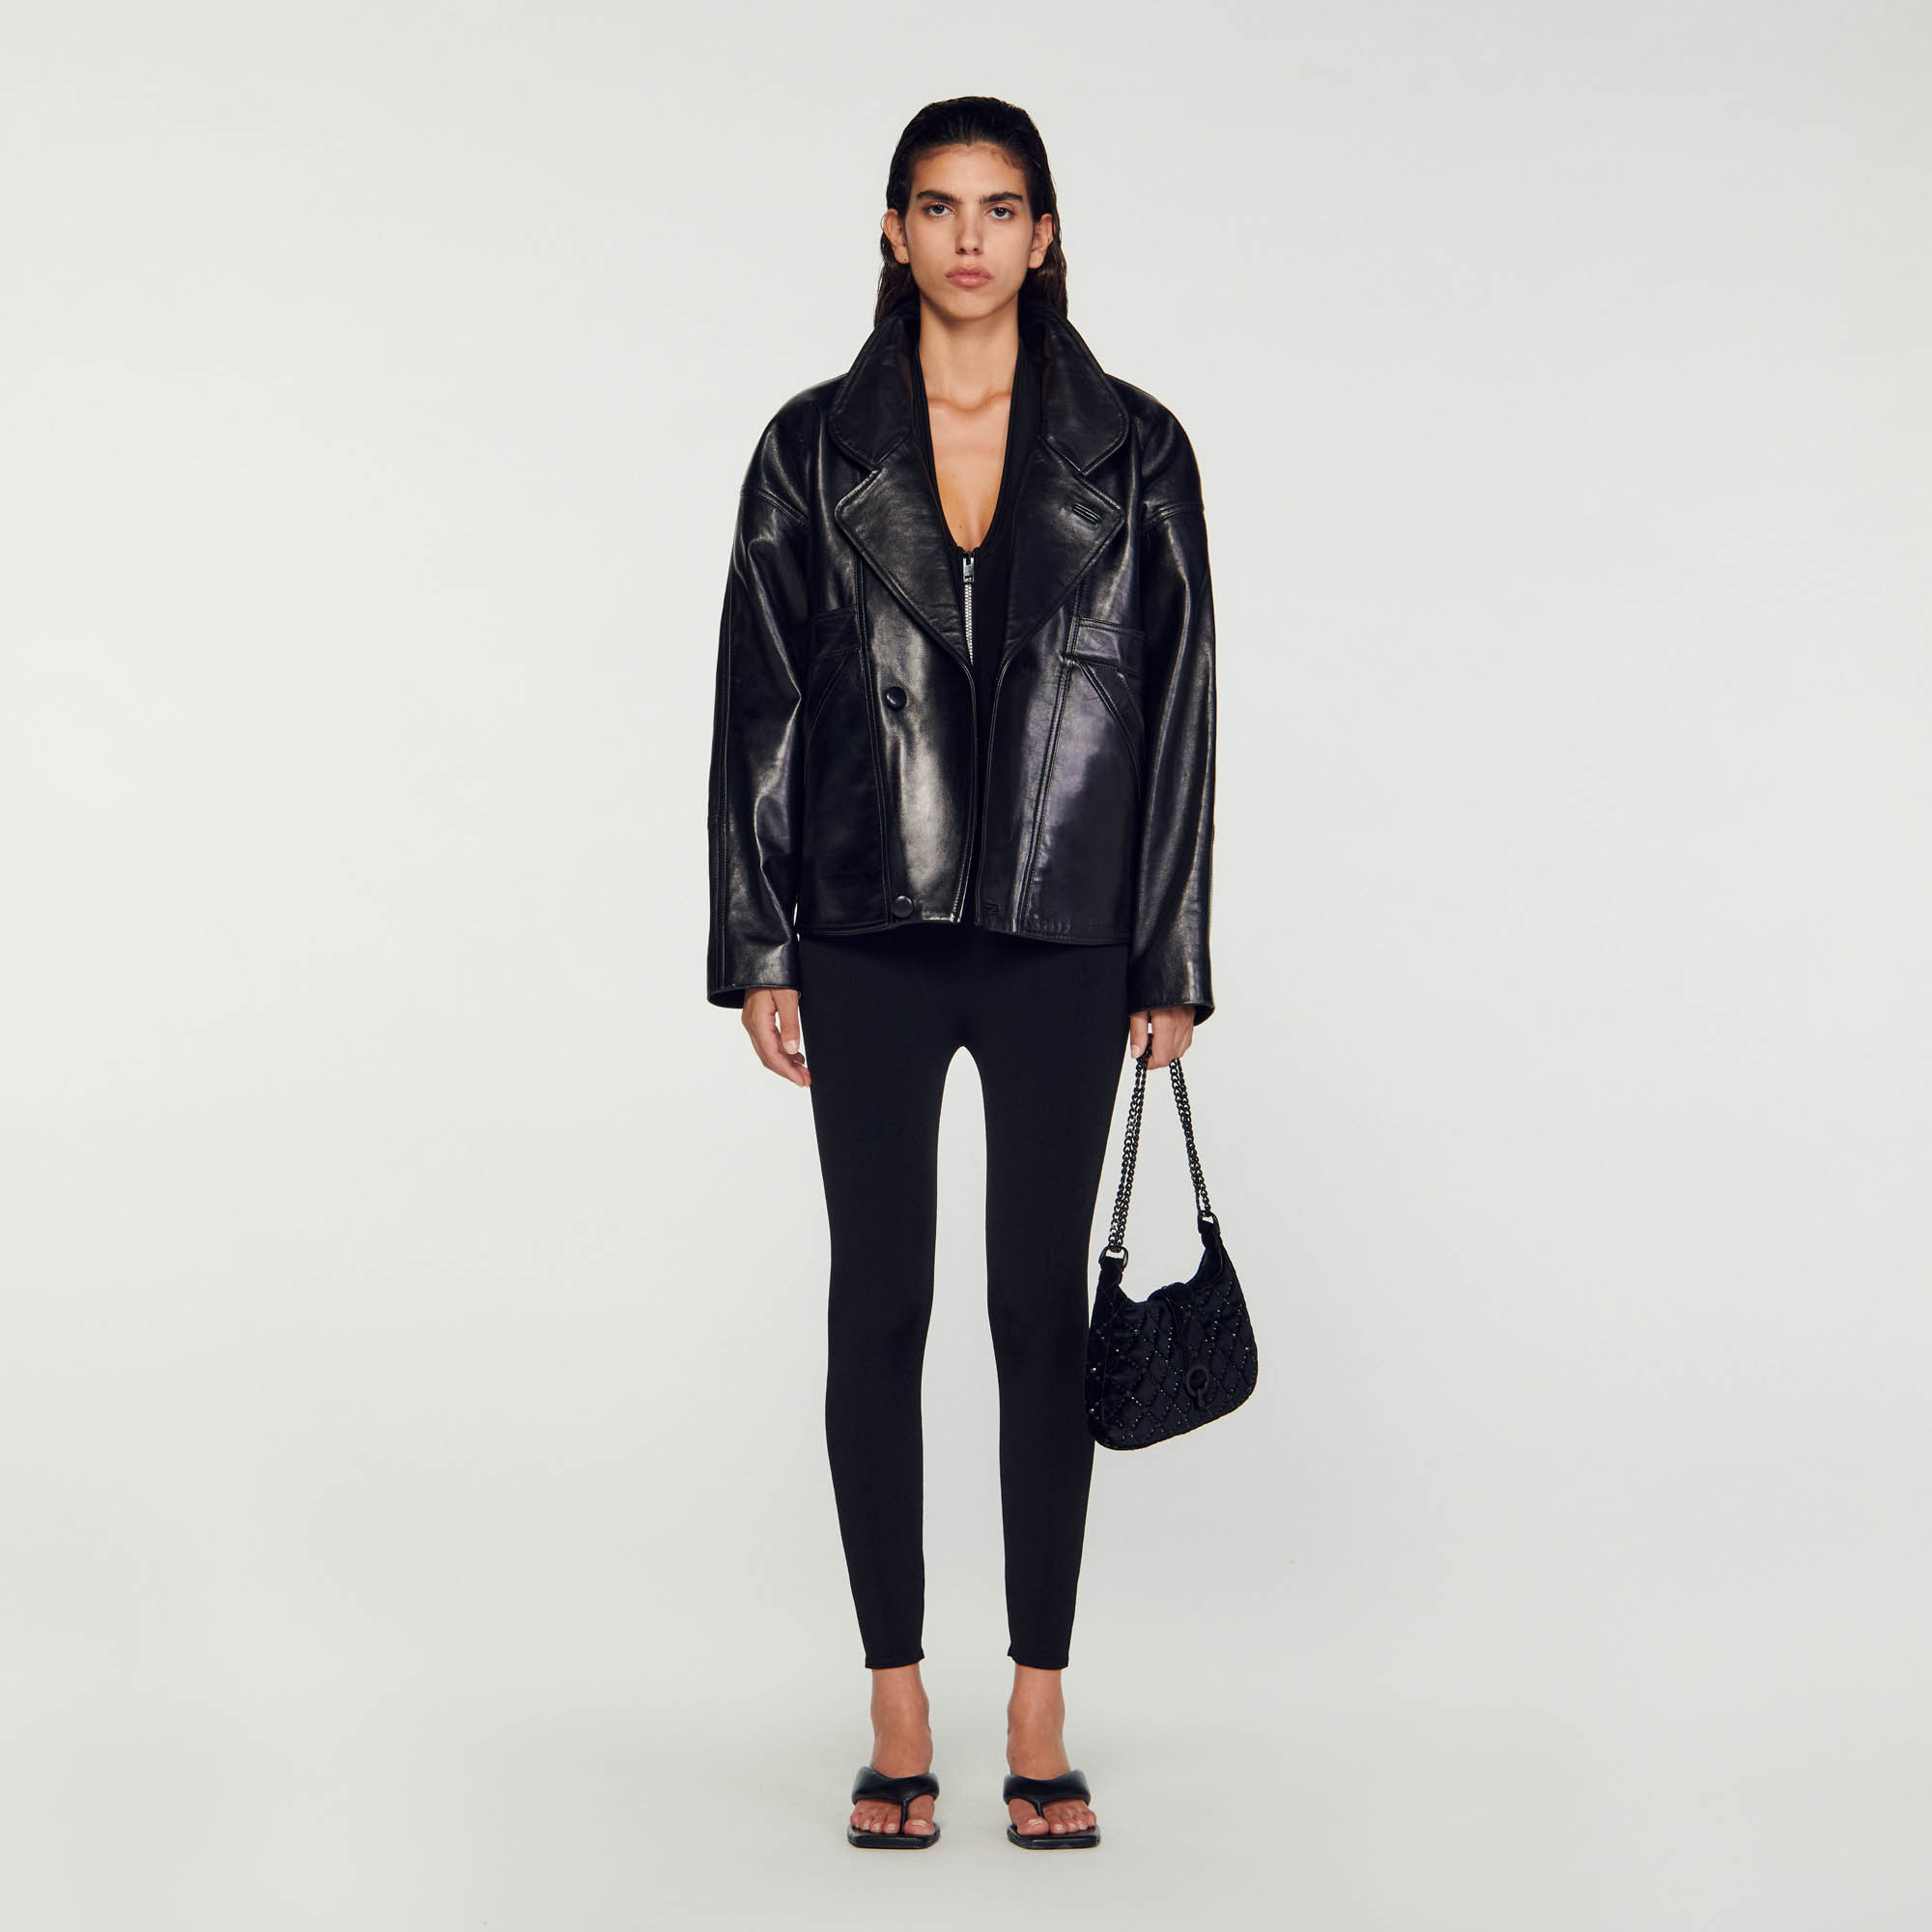 Sandro polyester Oversized leather jacket featuring a lapel collar with a suit jacket look, long sleeves, a double-breasted fastening and embellished with tailored details on the front